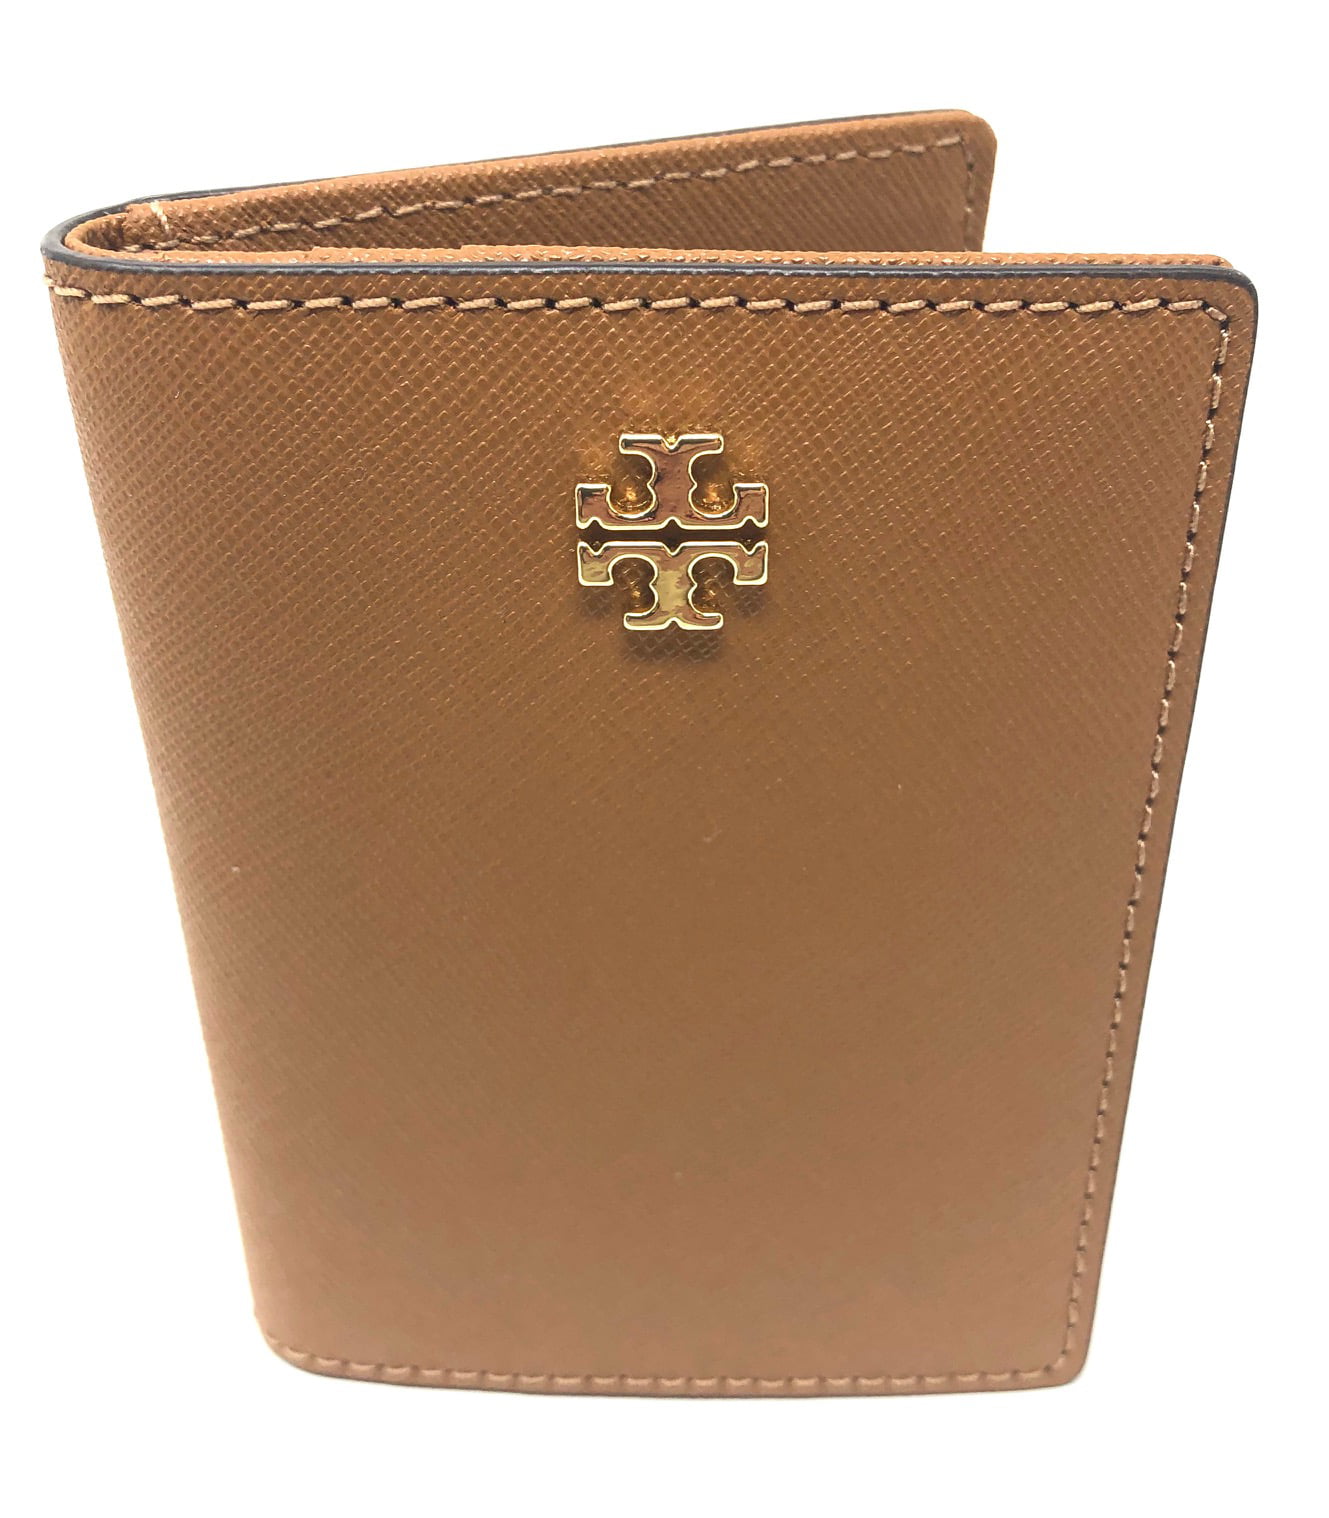 Tory Burch Women's Emerson Saffiano Leather Foldable Card ID Case Wallet  (Tiger's Eye) 